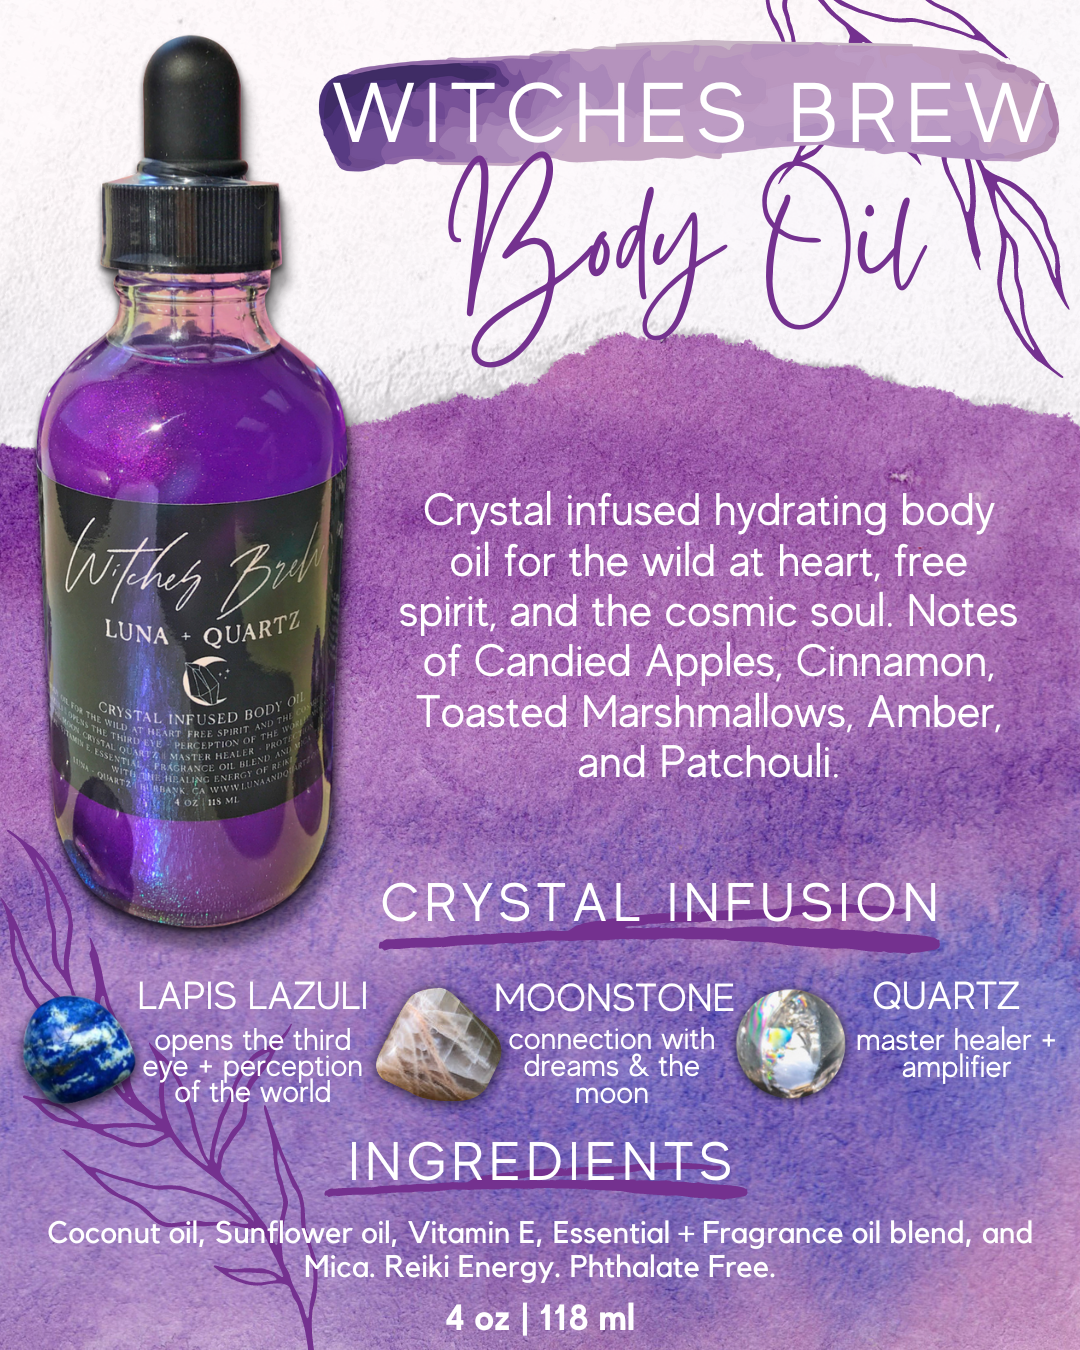 Witches Brew Crystal Infused Body Oil